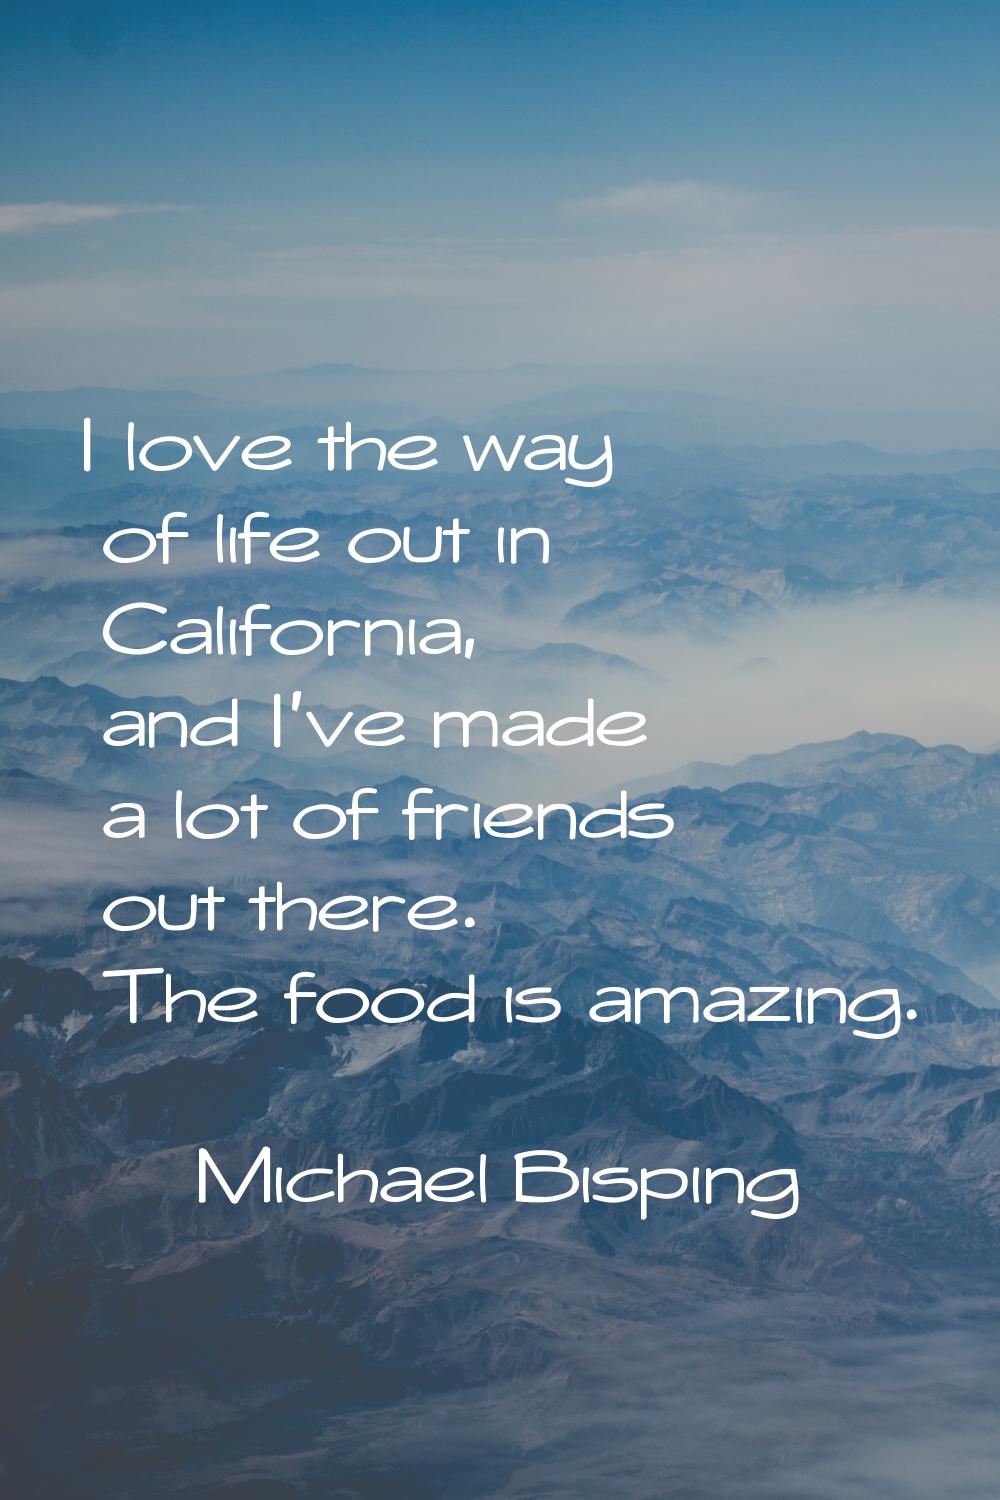 I love the way of life out in California, and I've made a lot of friends out there. The food is ama